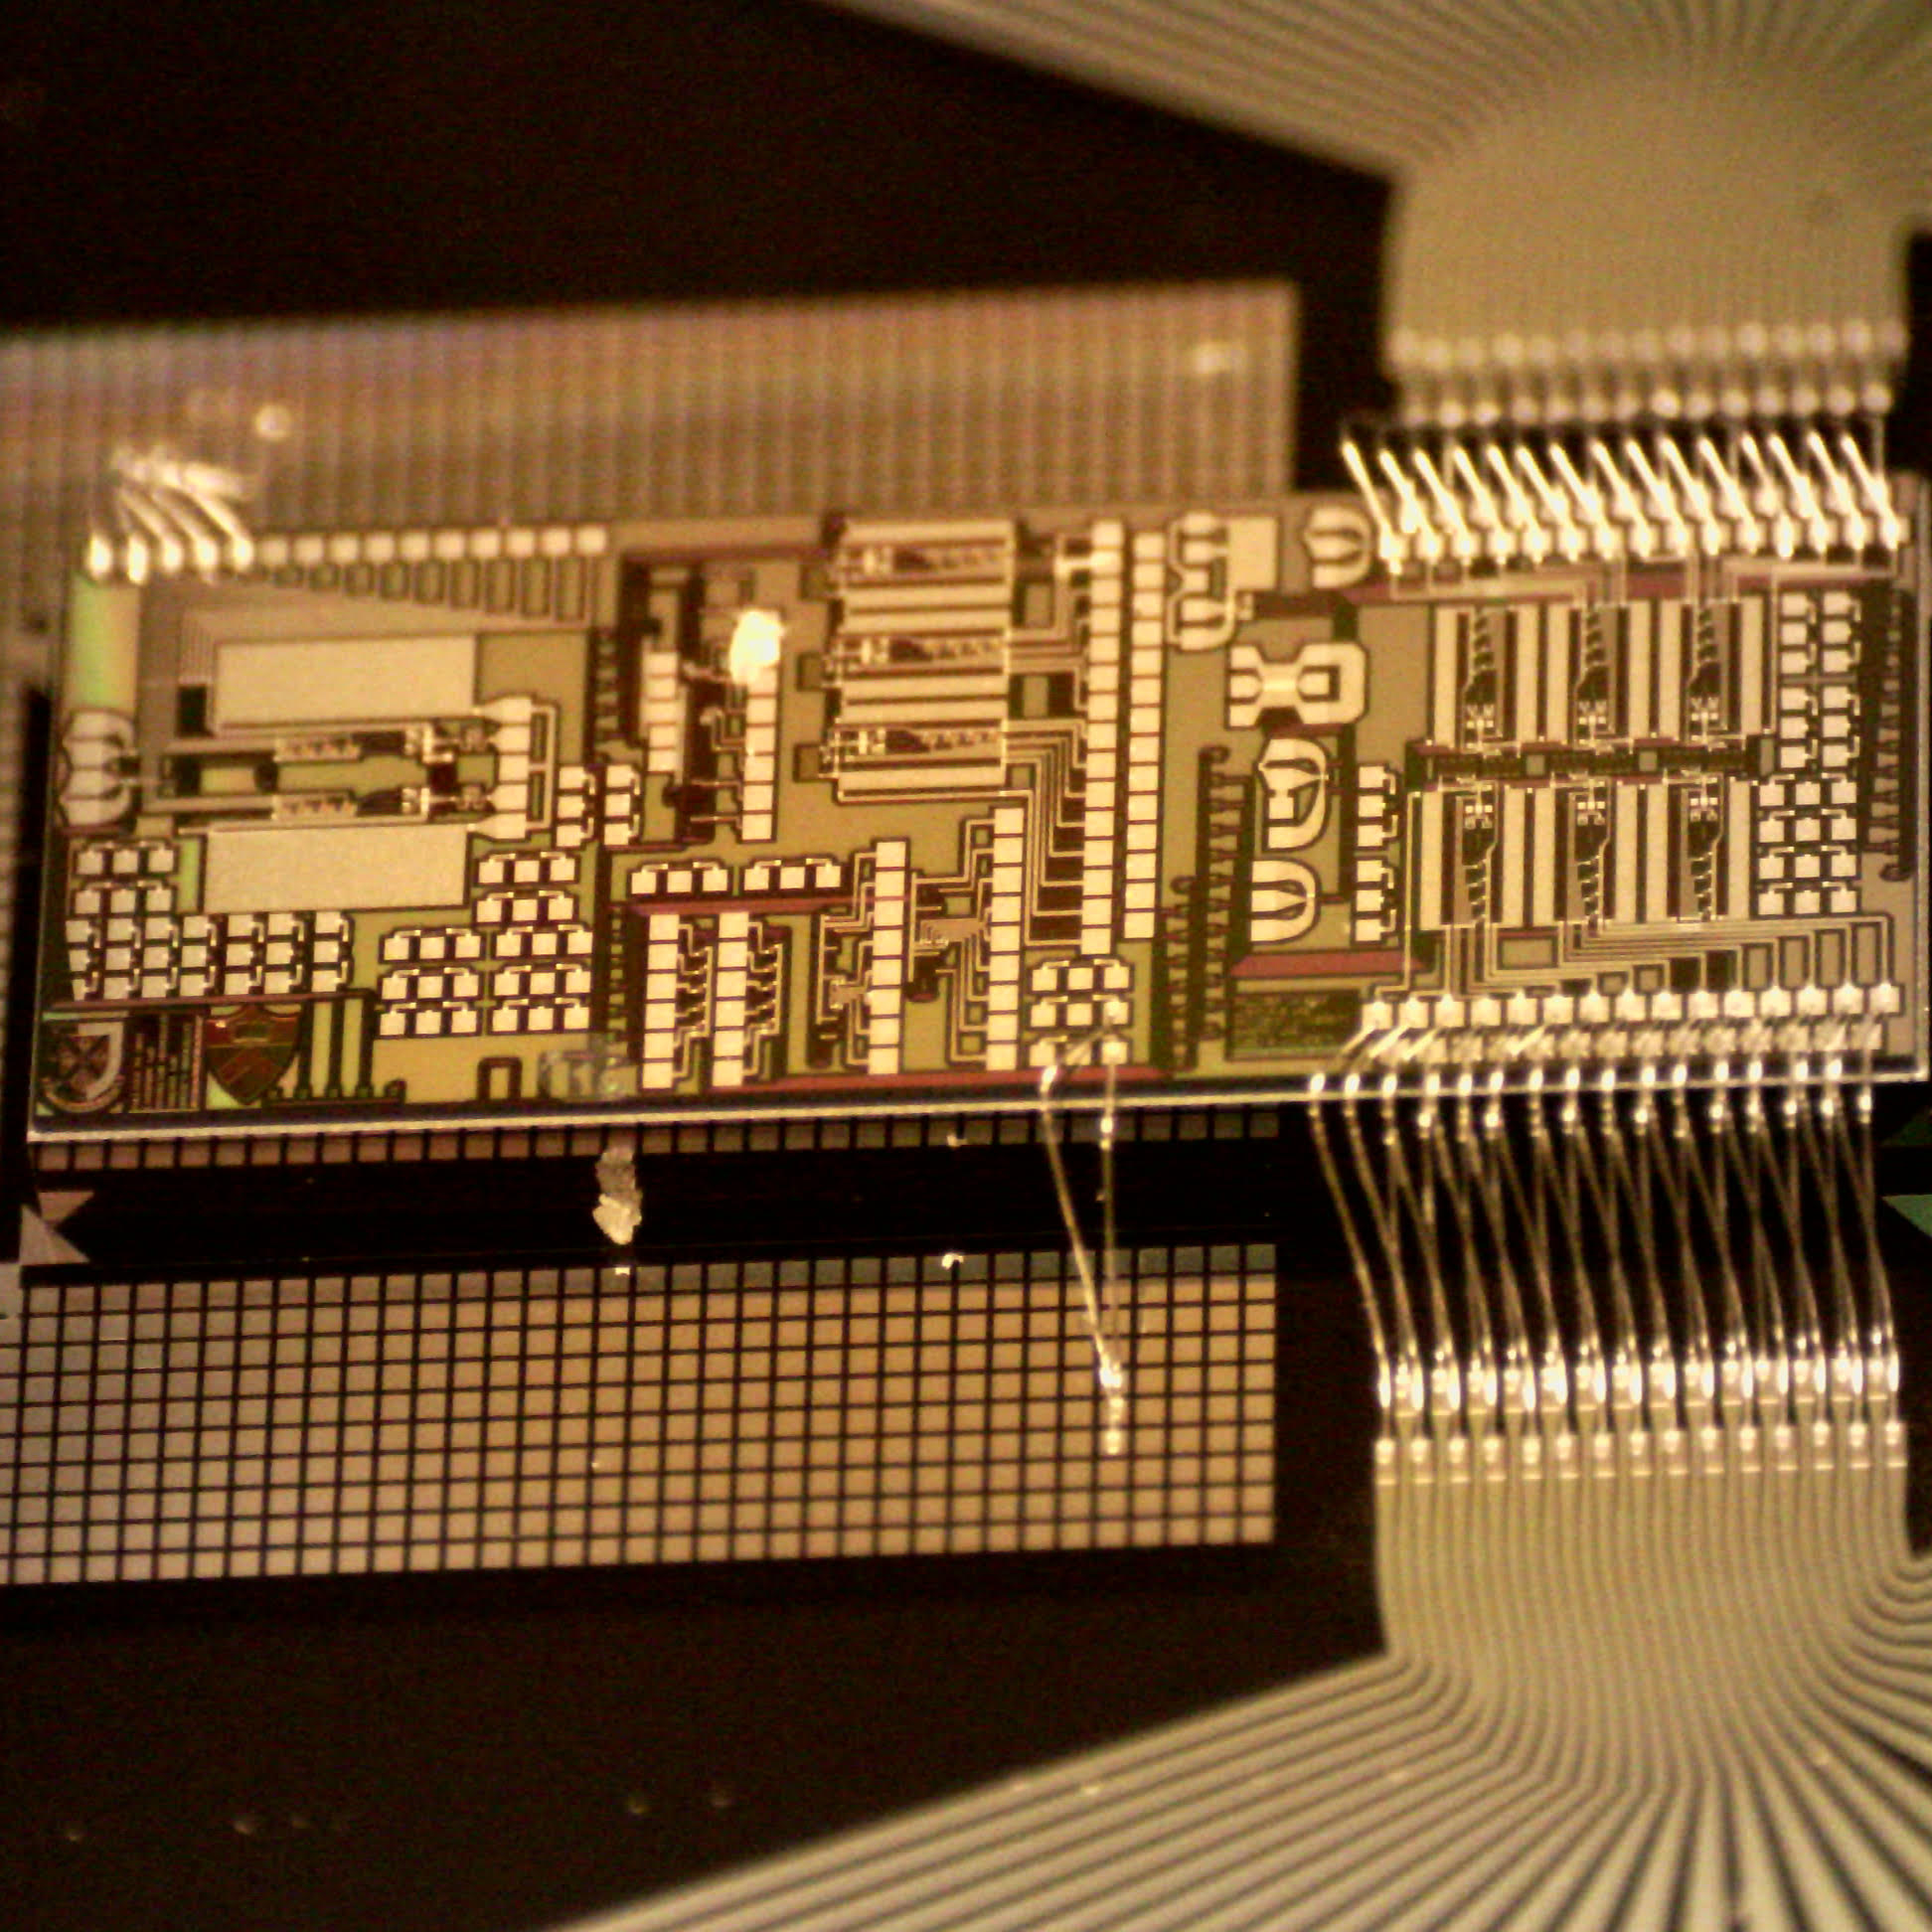 CHIP used in research 